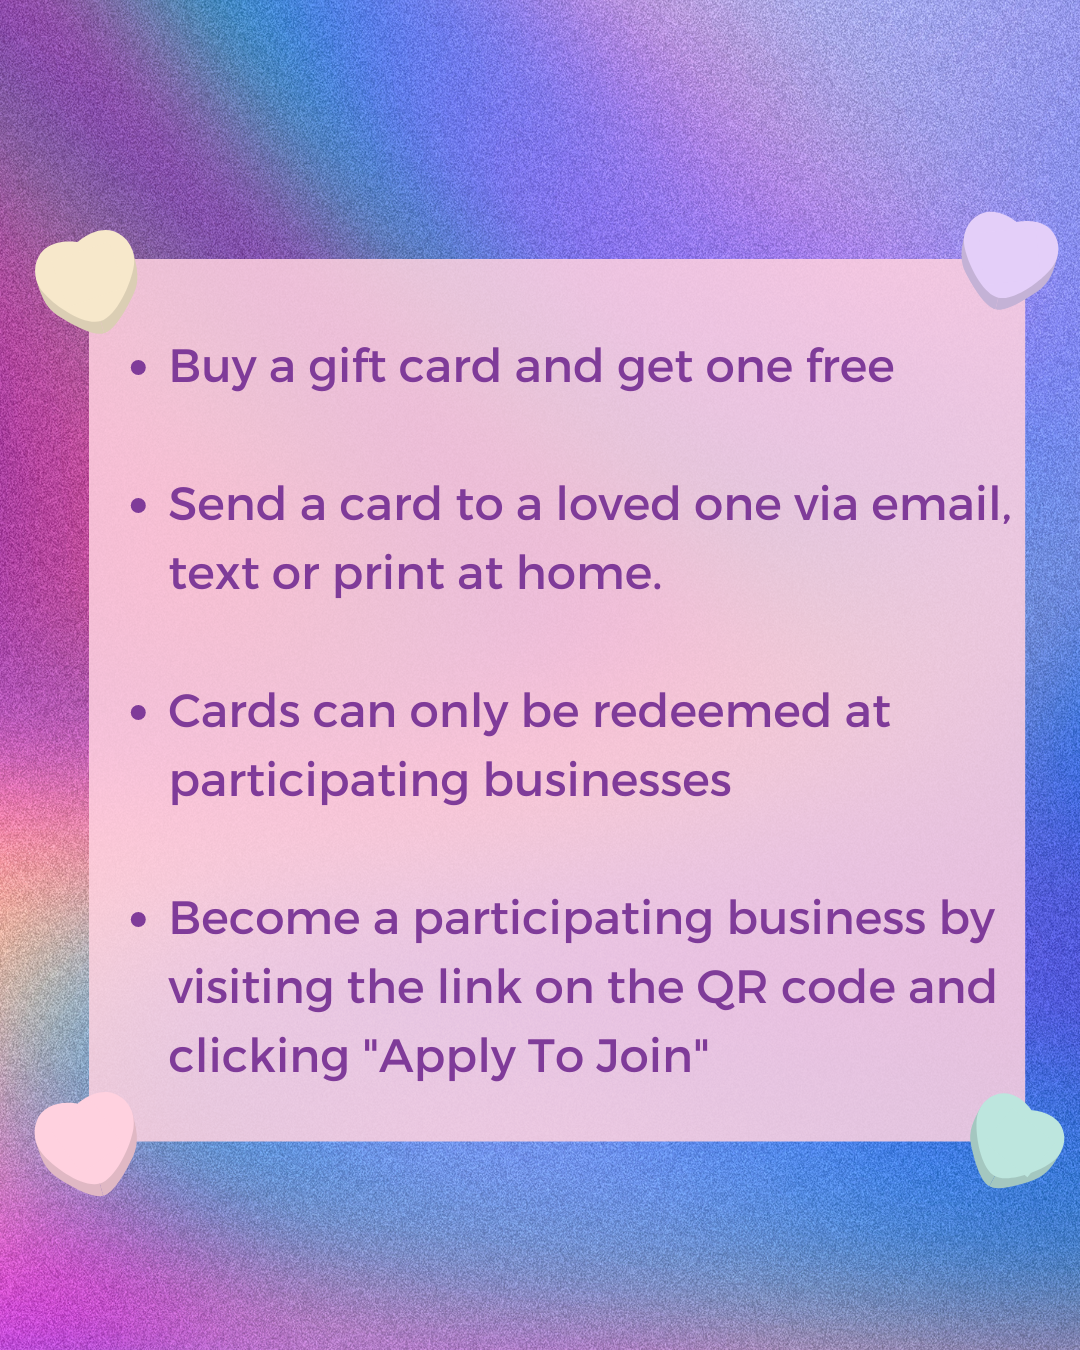 Valentines Day Gift Card Promo (1).png